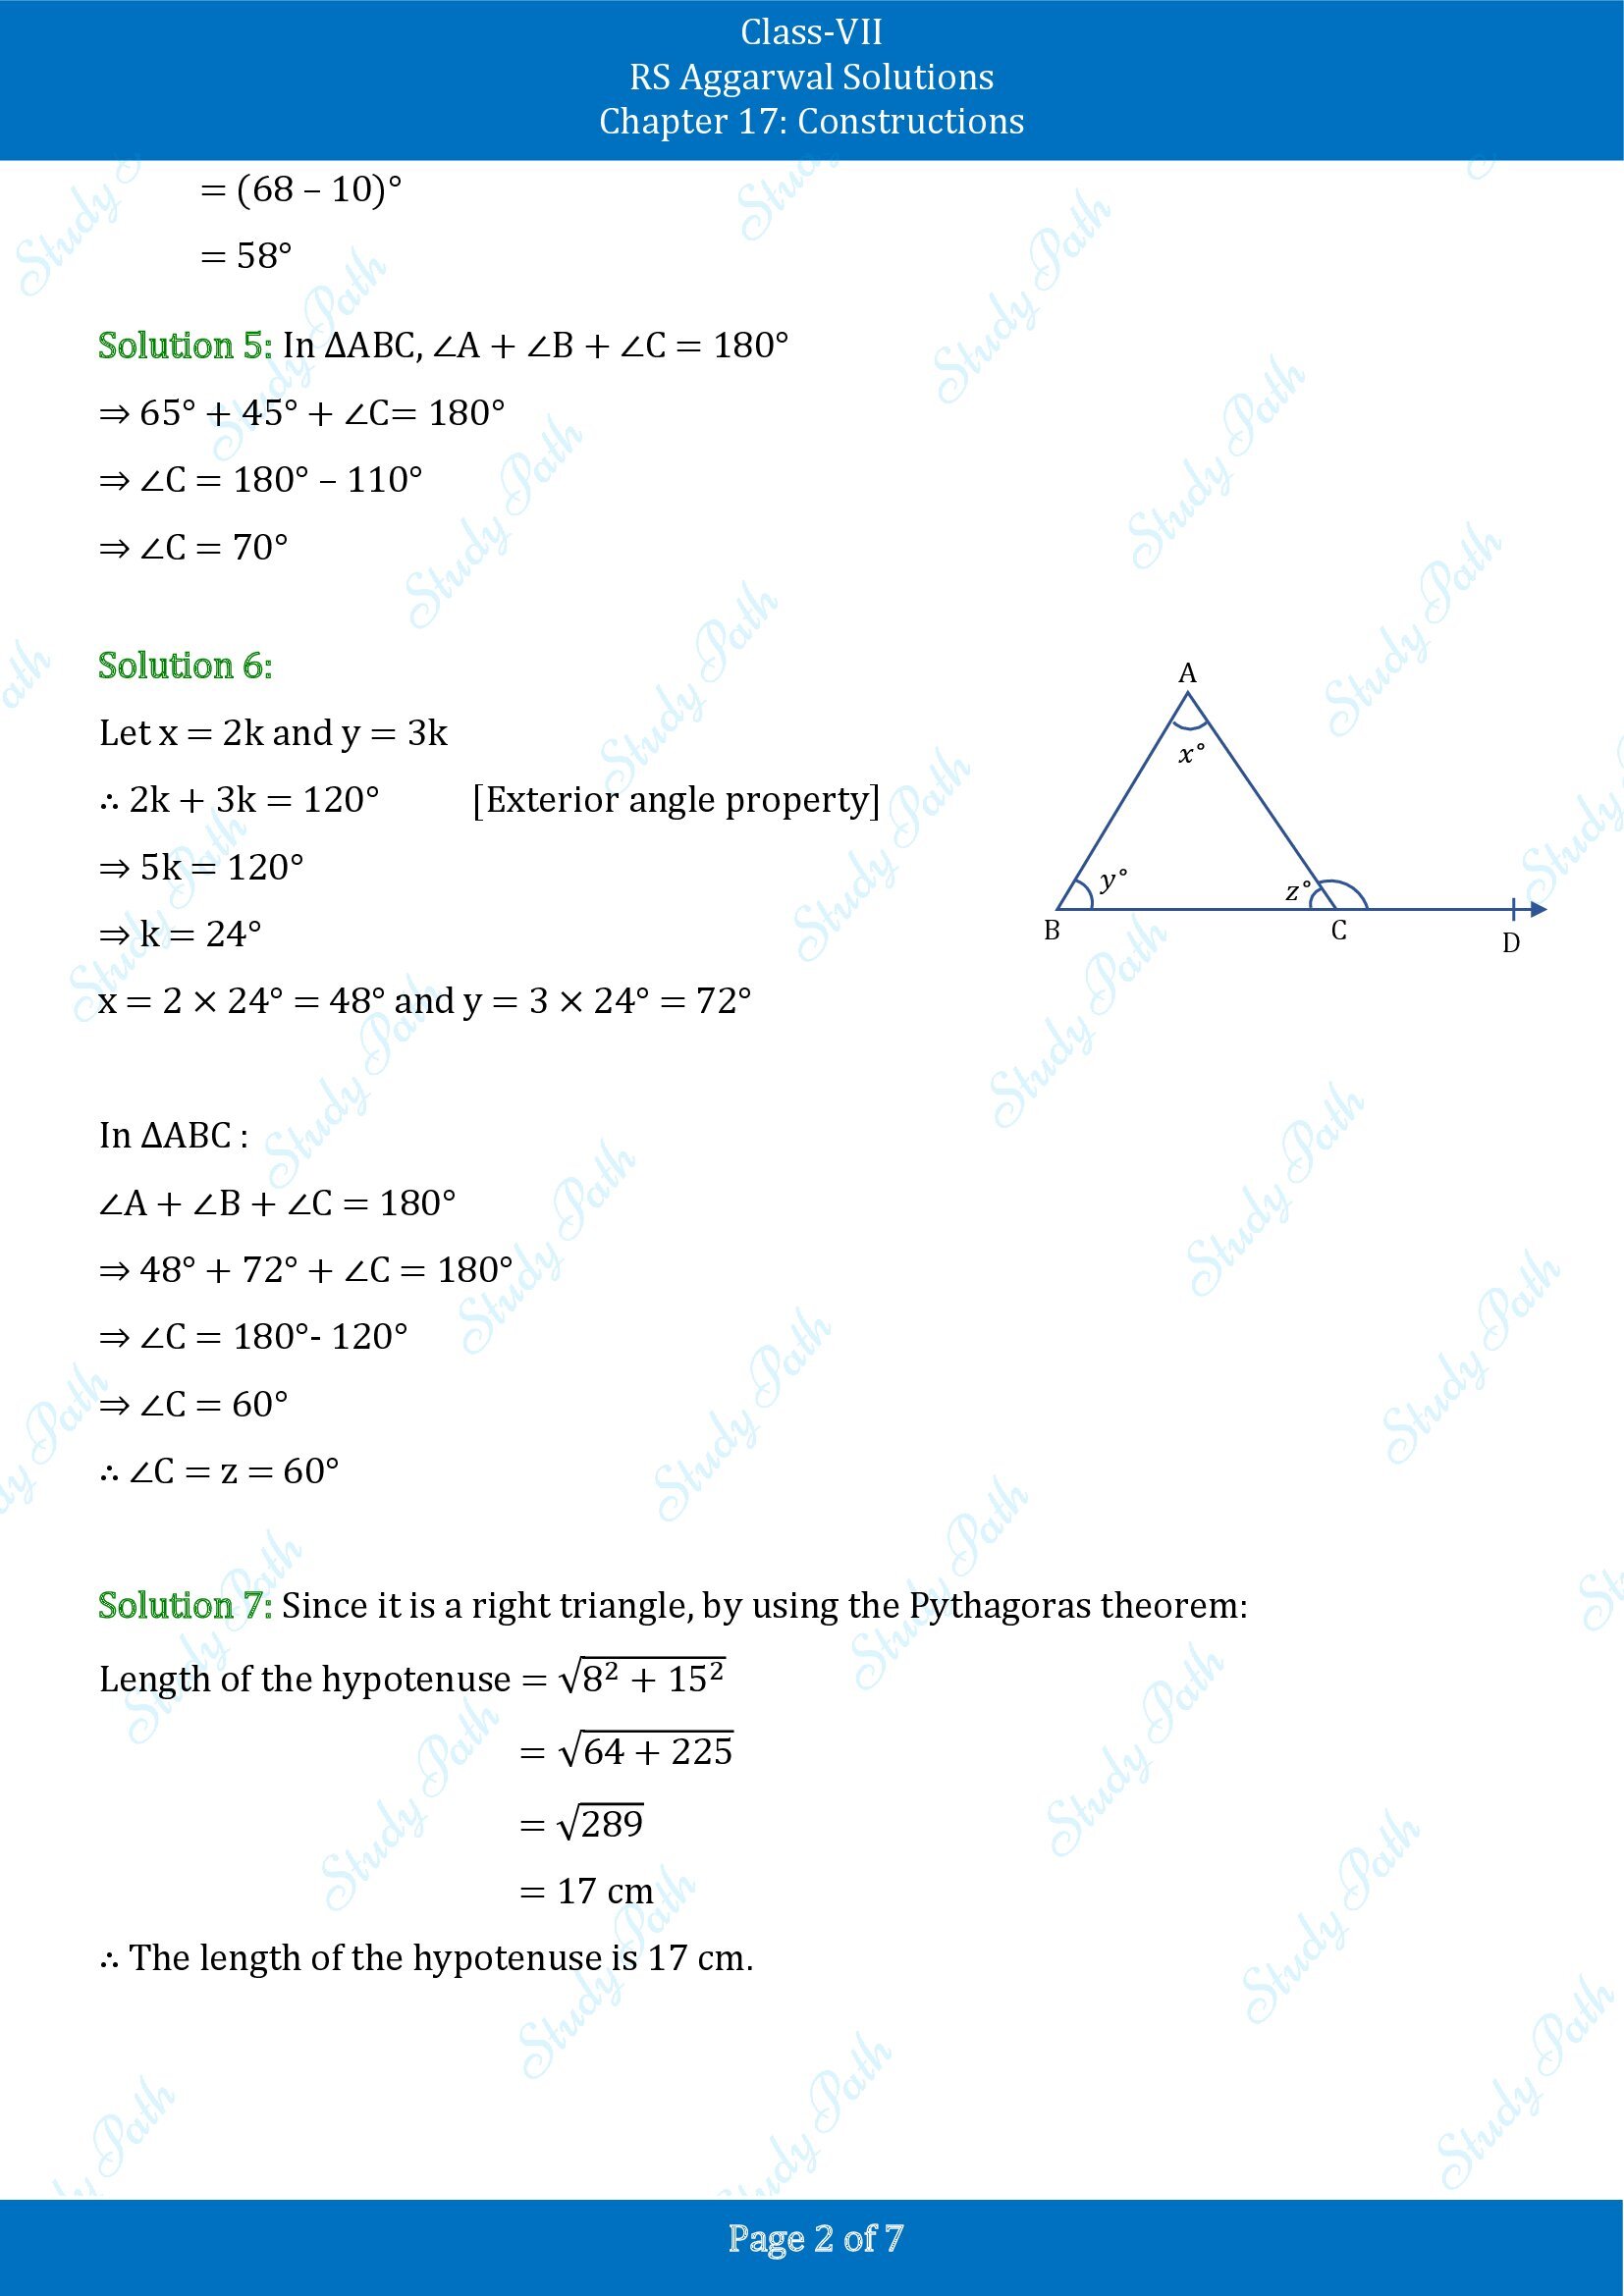 RS Aggarwal Solutions Class 7 Chapter 17 Constructions Test Paper 00002